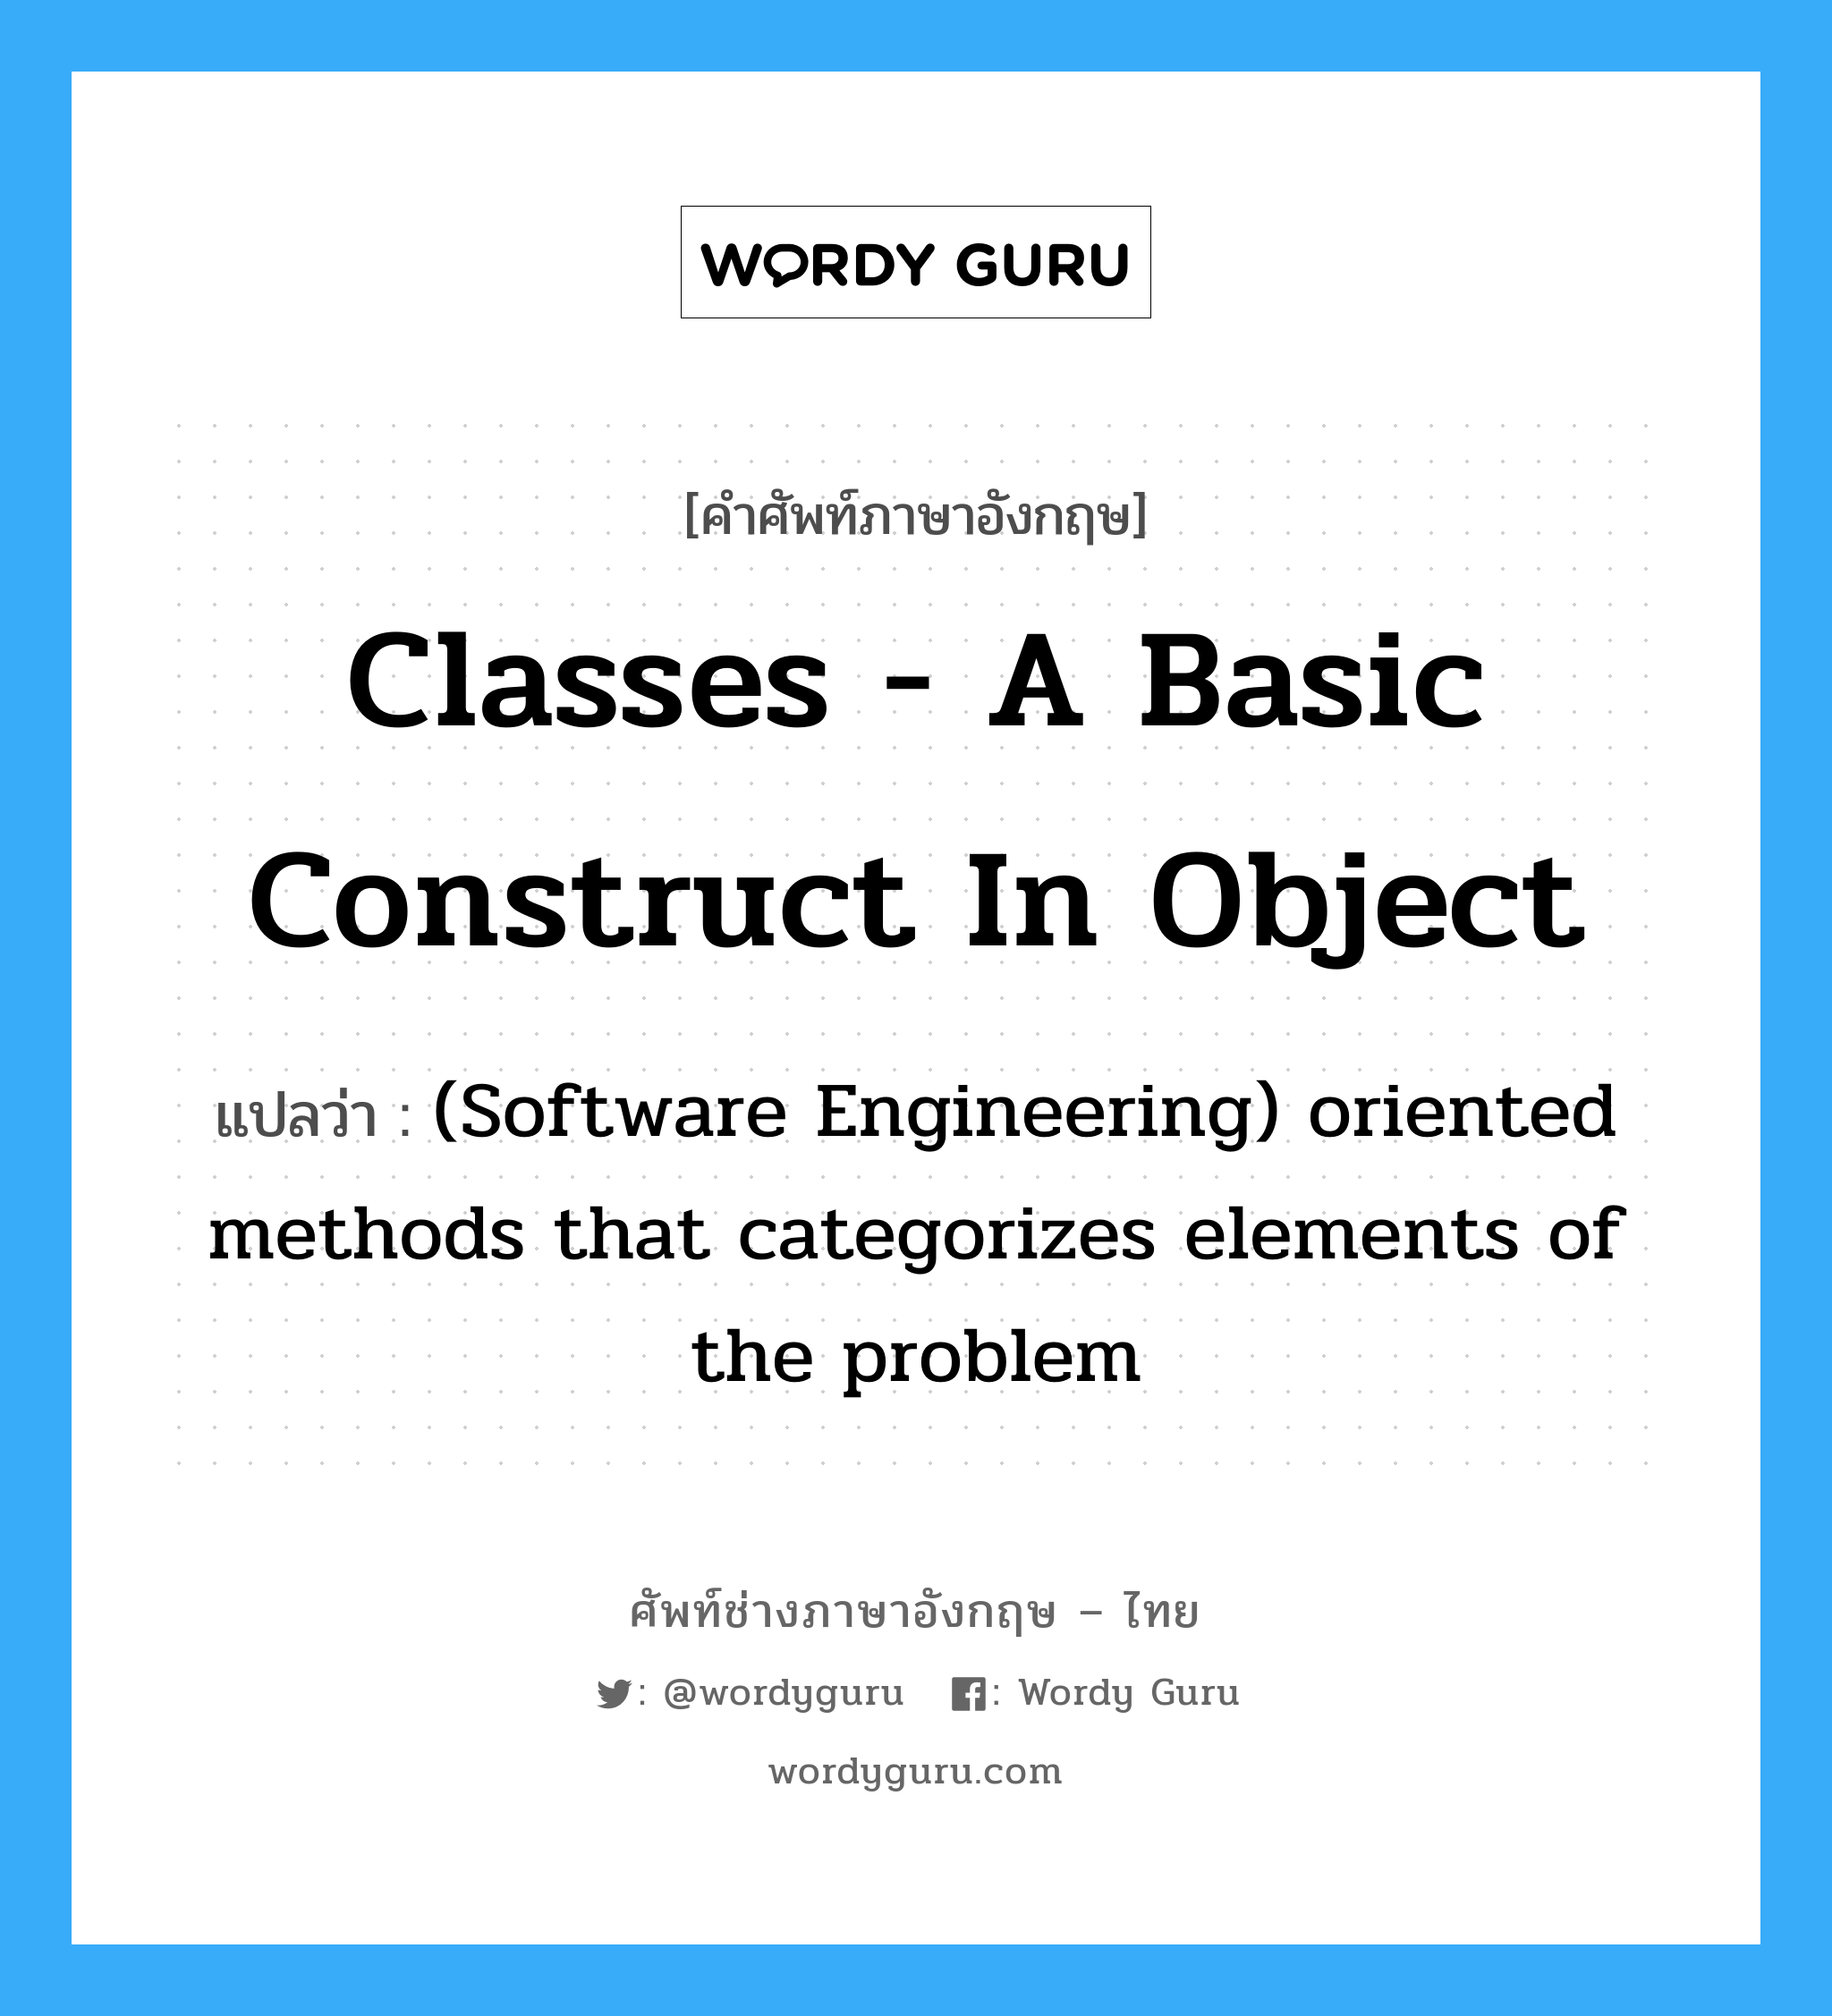 Classes - a basic construct in object แปลว่า?, คำศัพท์ช่างภาษาอังกฤษ - ไทย Classes - a basic construct in object คำศัพท์ภาษาอังกฤษ Classes - a basic construct in object แปลว่า (Software Engineering) oriented methods that categorizes elements of the problem